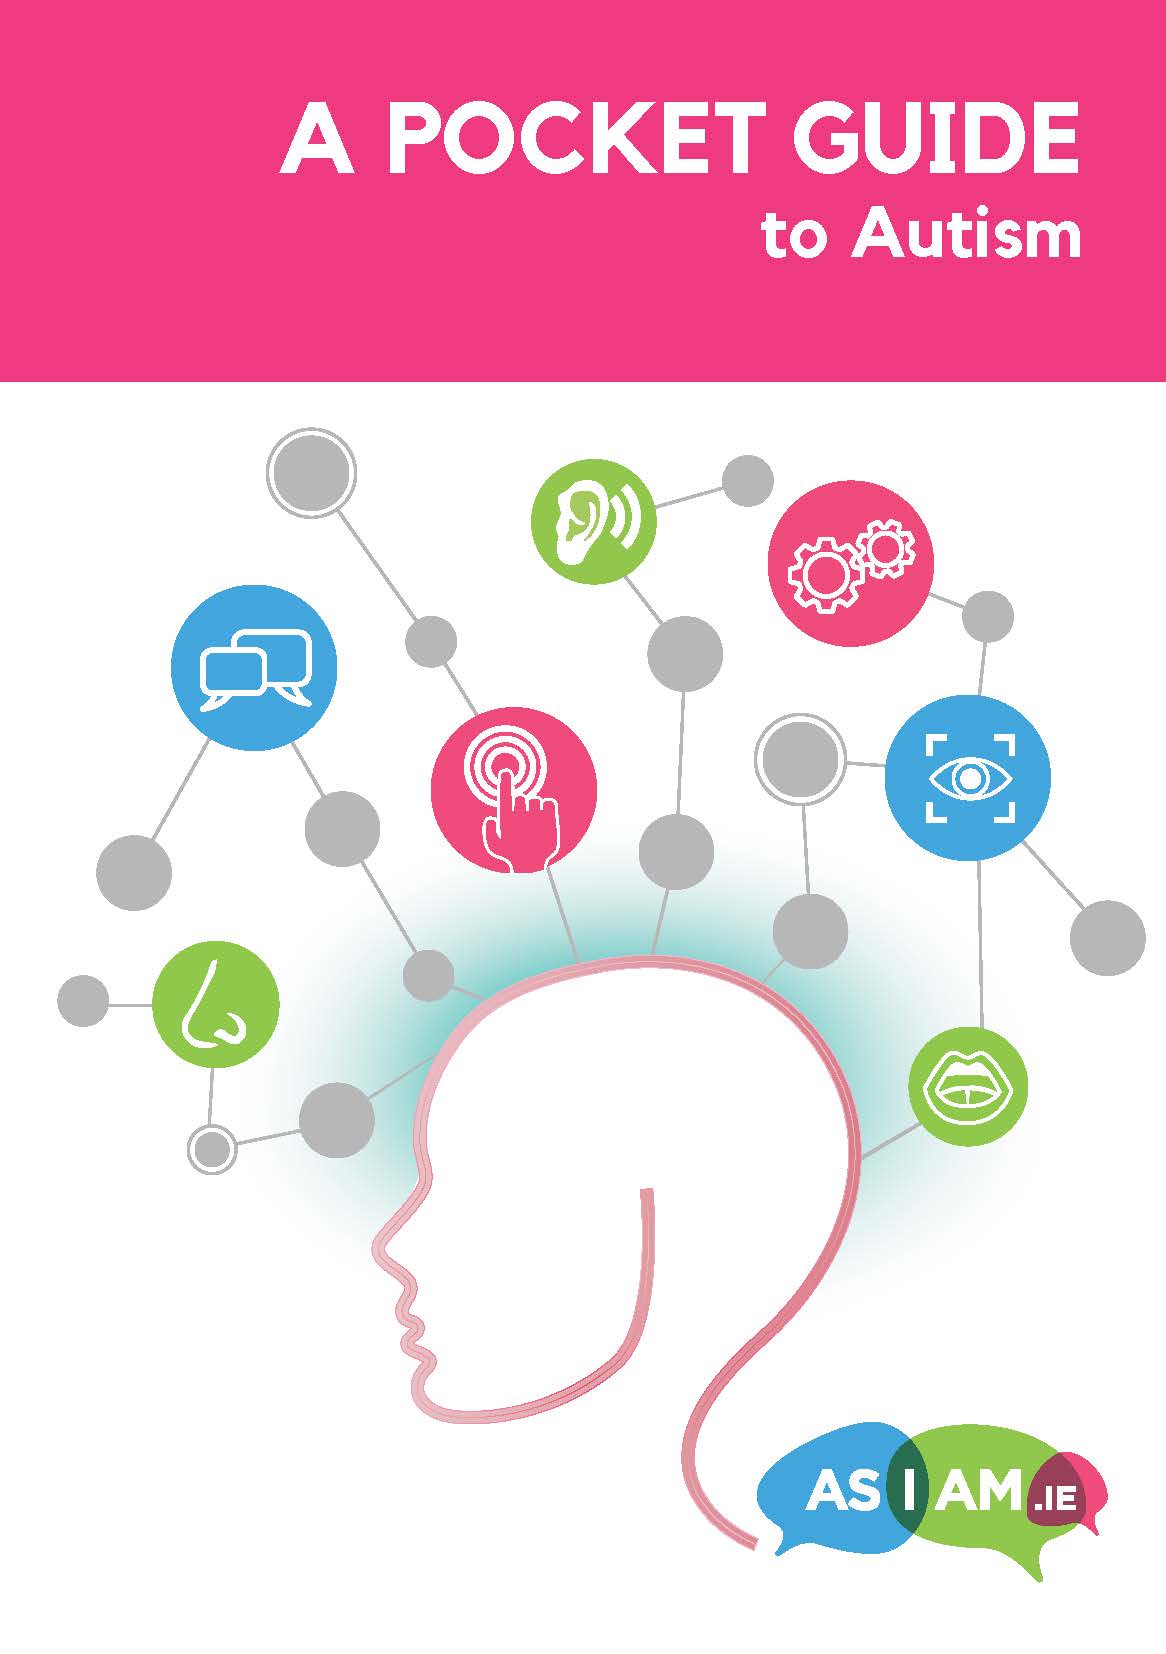 As I Am's A Pocket Guide to Autism